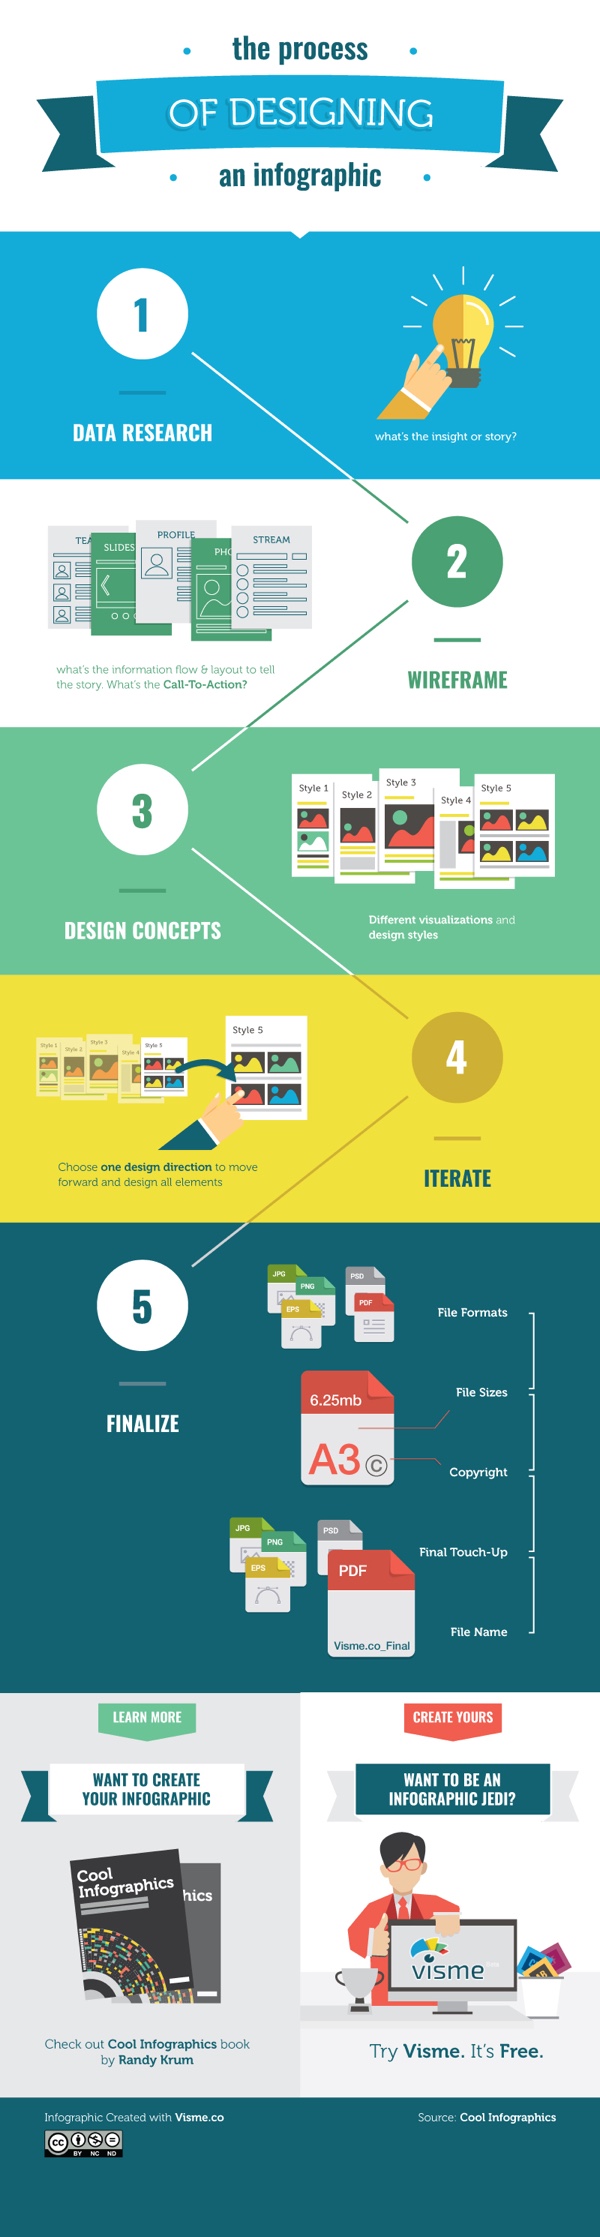 The Process of Designing an Infographic